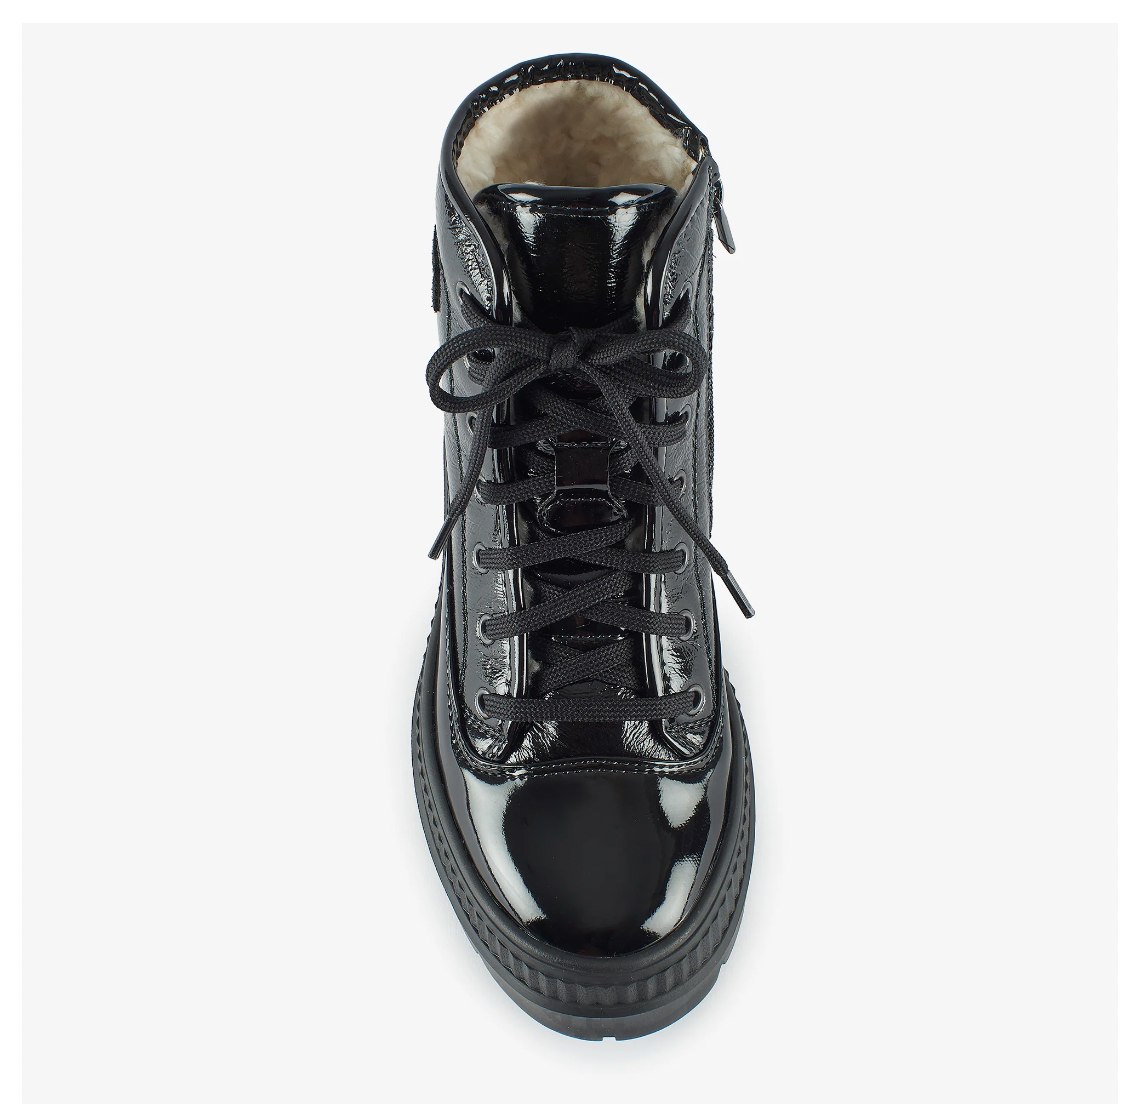 Olang "Spell" Black Patent waterproof boot Ice cleat -30